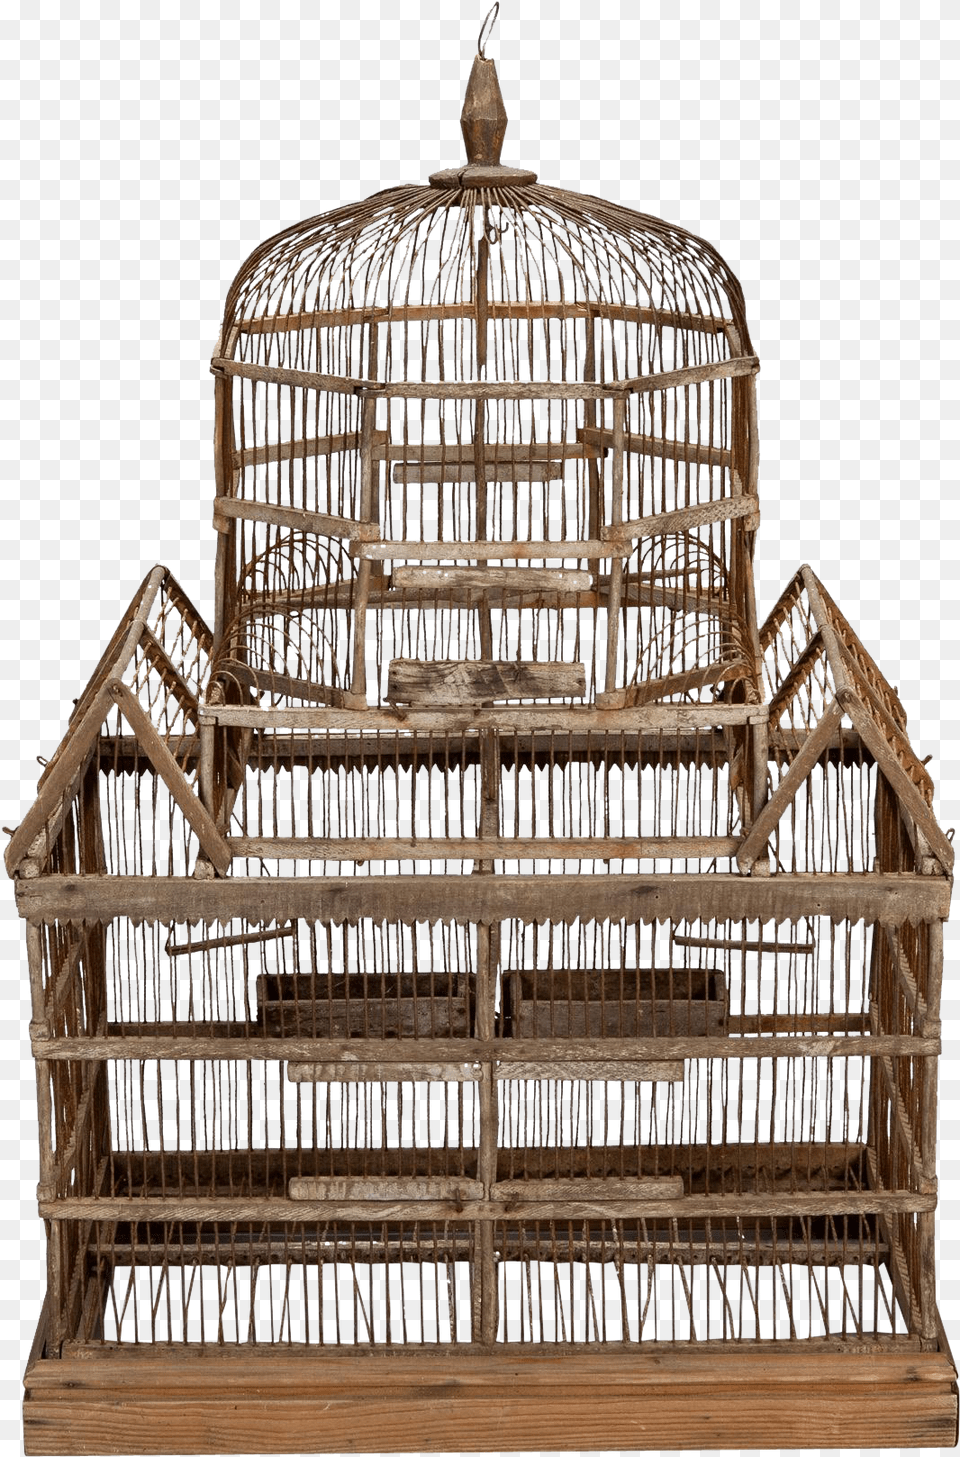 English 19th Century Handmade Wooden Bird Cage Found Birdcage, Crib, Furniture, Infant Bed Free Transparent Png